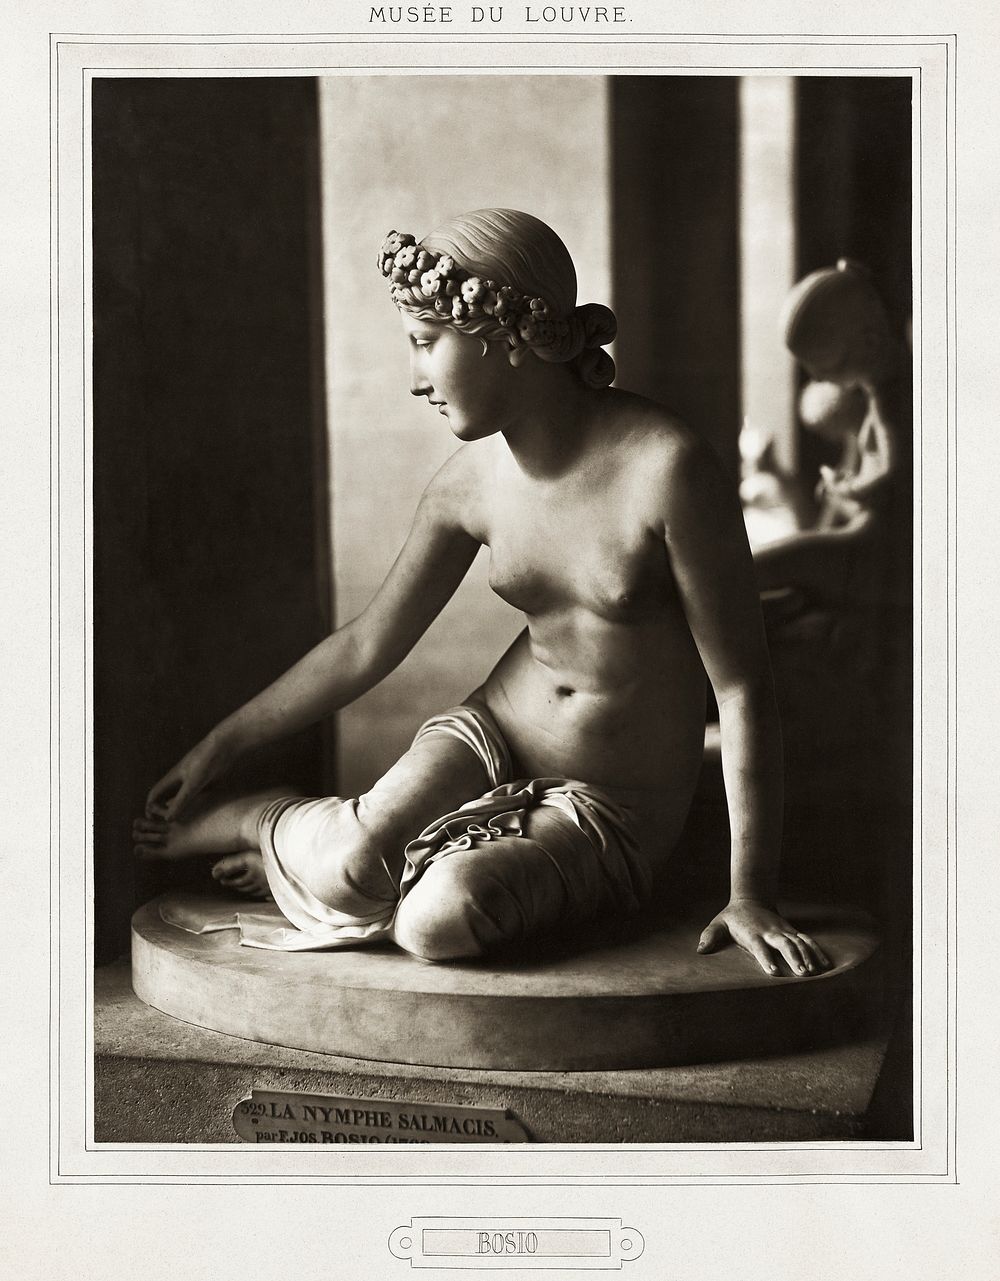 Naked woman sculpture, Mus&eacute;e du Louvre (ca. 1866) by Adolphe Braun. Original from The Getty. Digitally enhanced by…